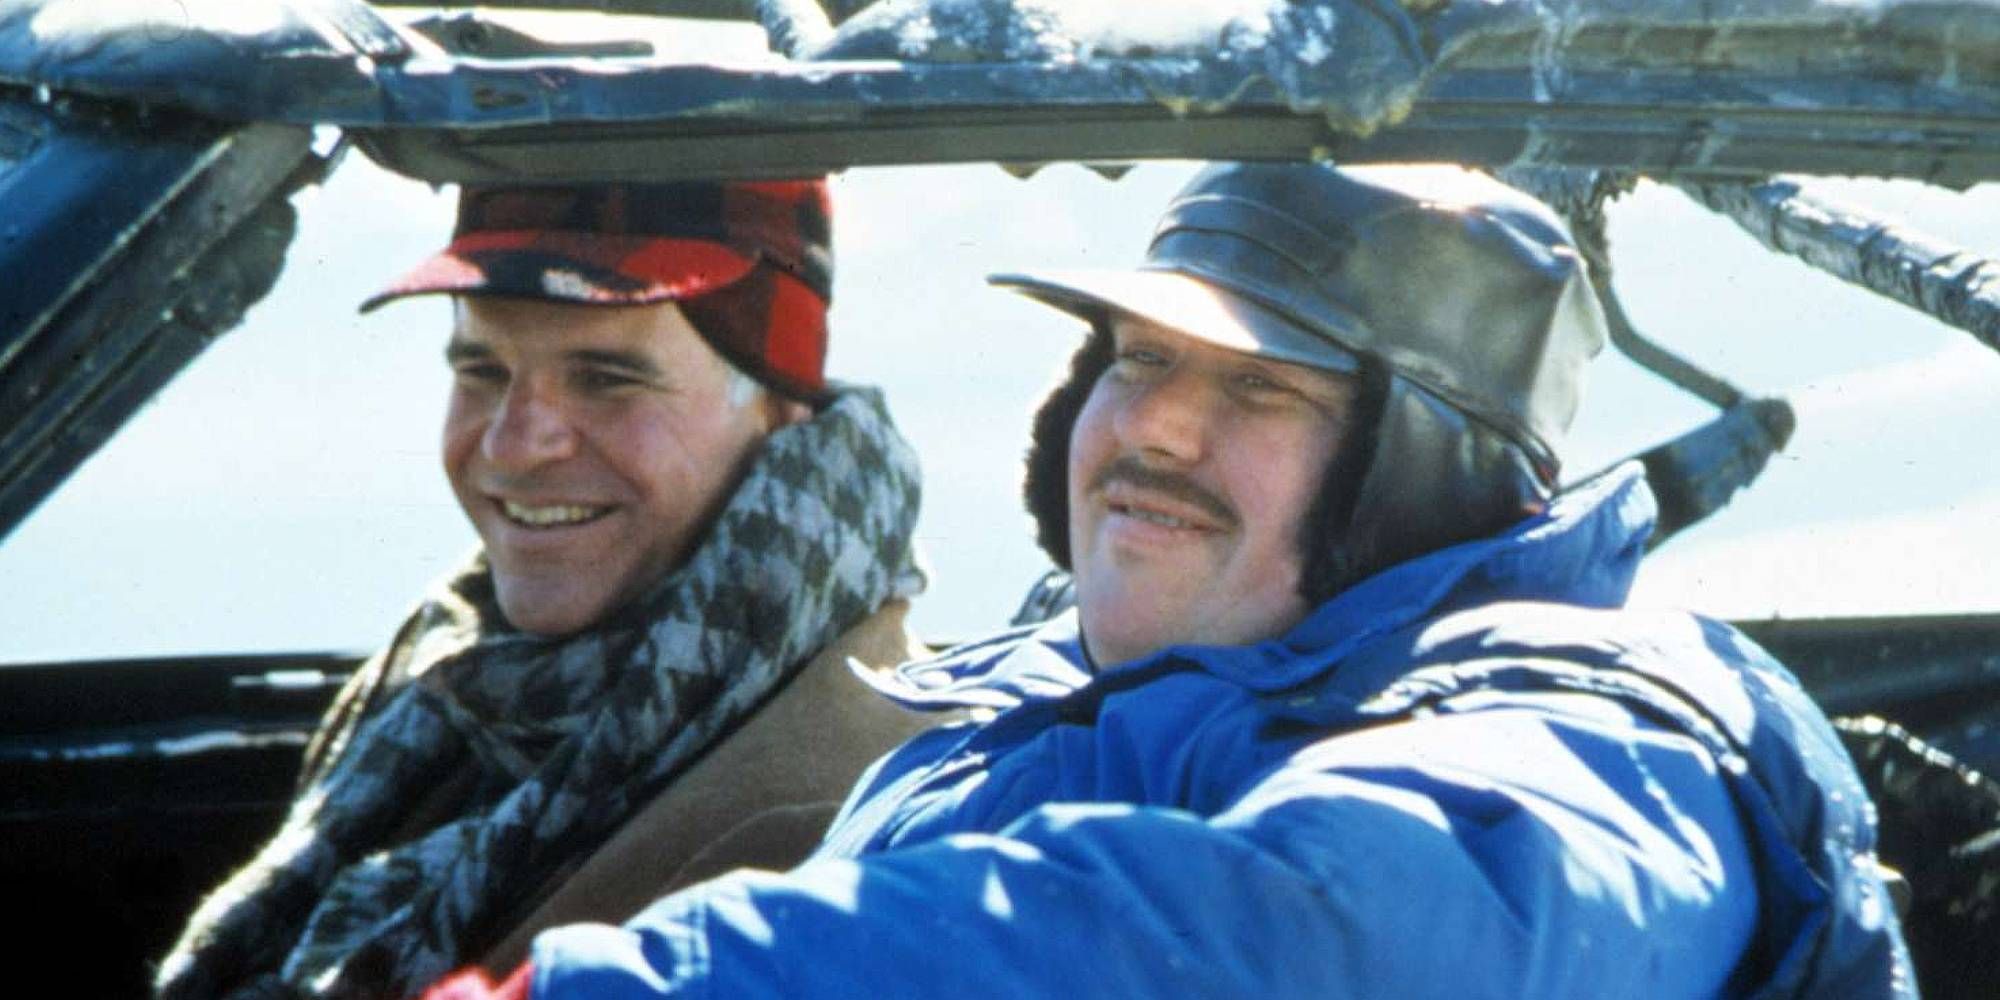 John Candy and Steve Martin in Planes, Trains, and Automobiles are smiling sitting next to each other inside a car.